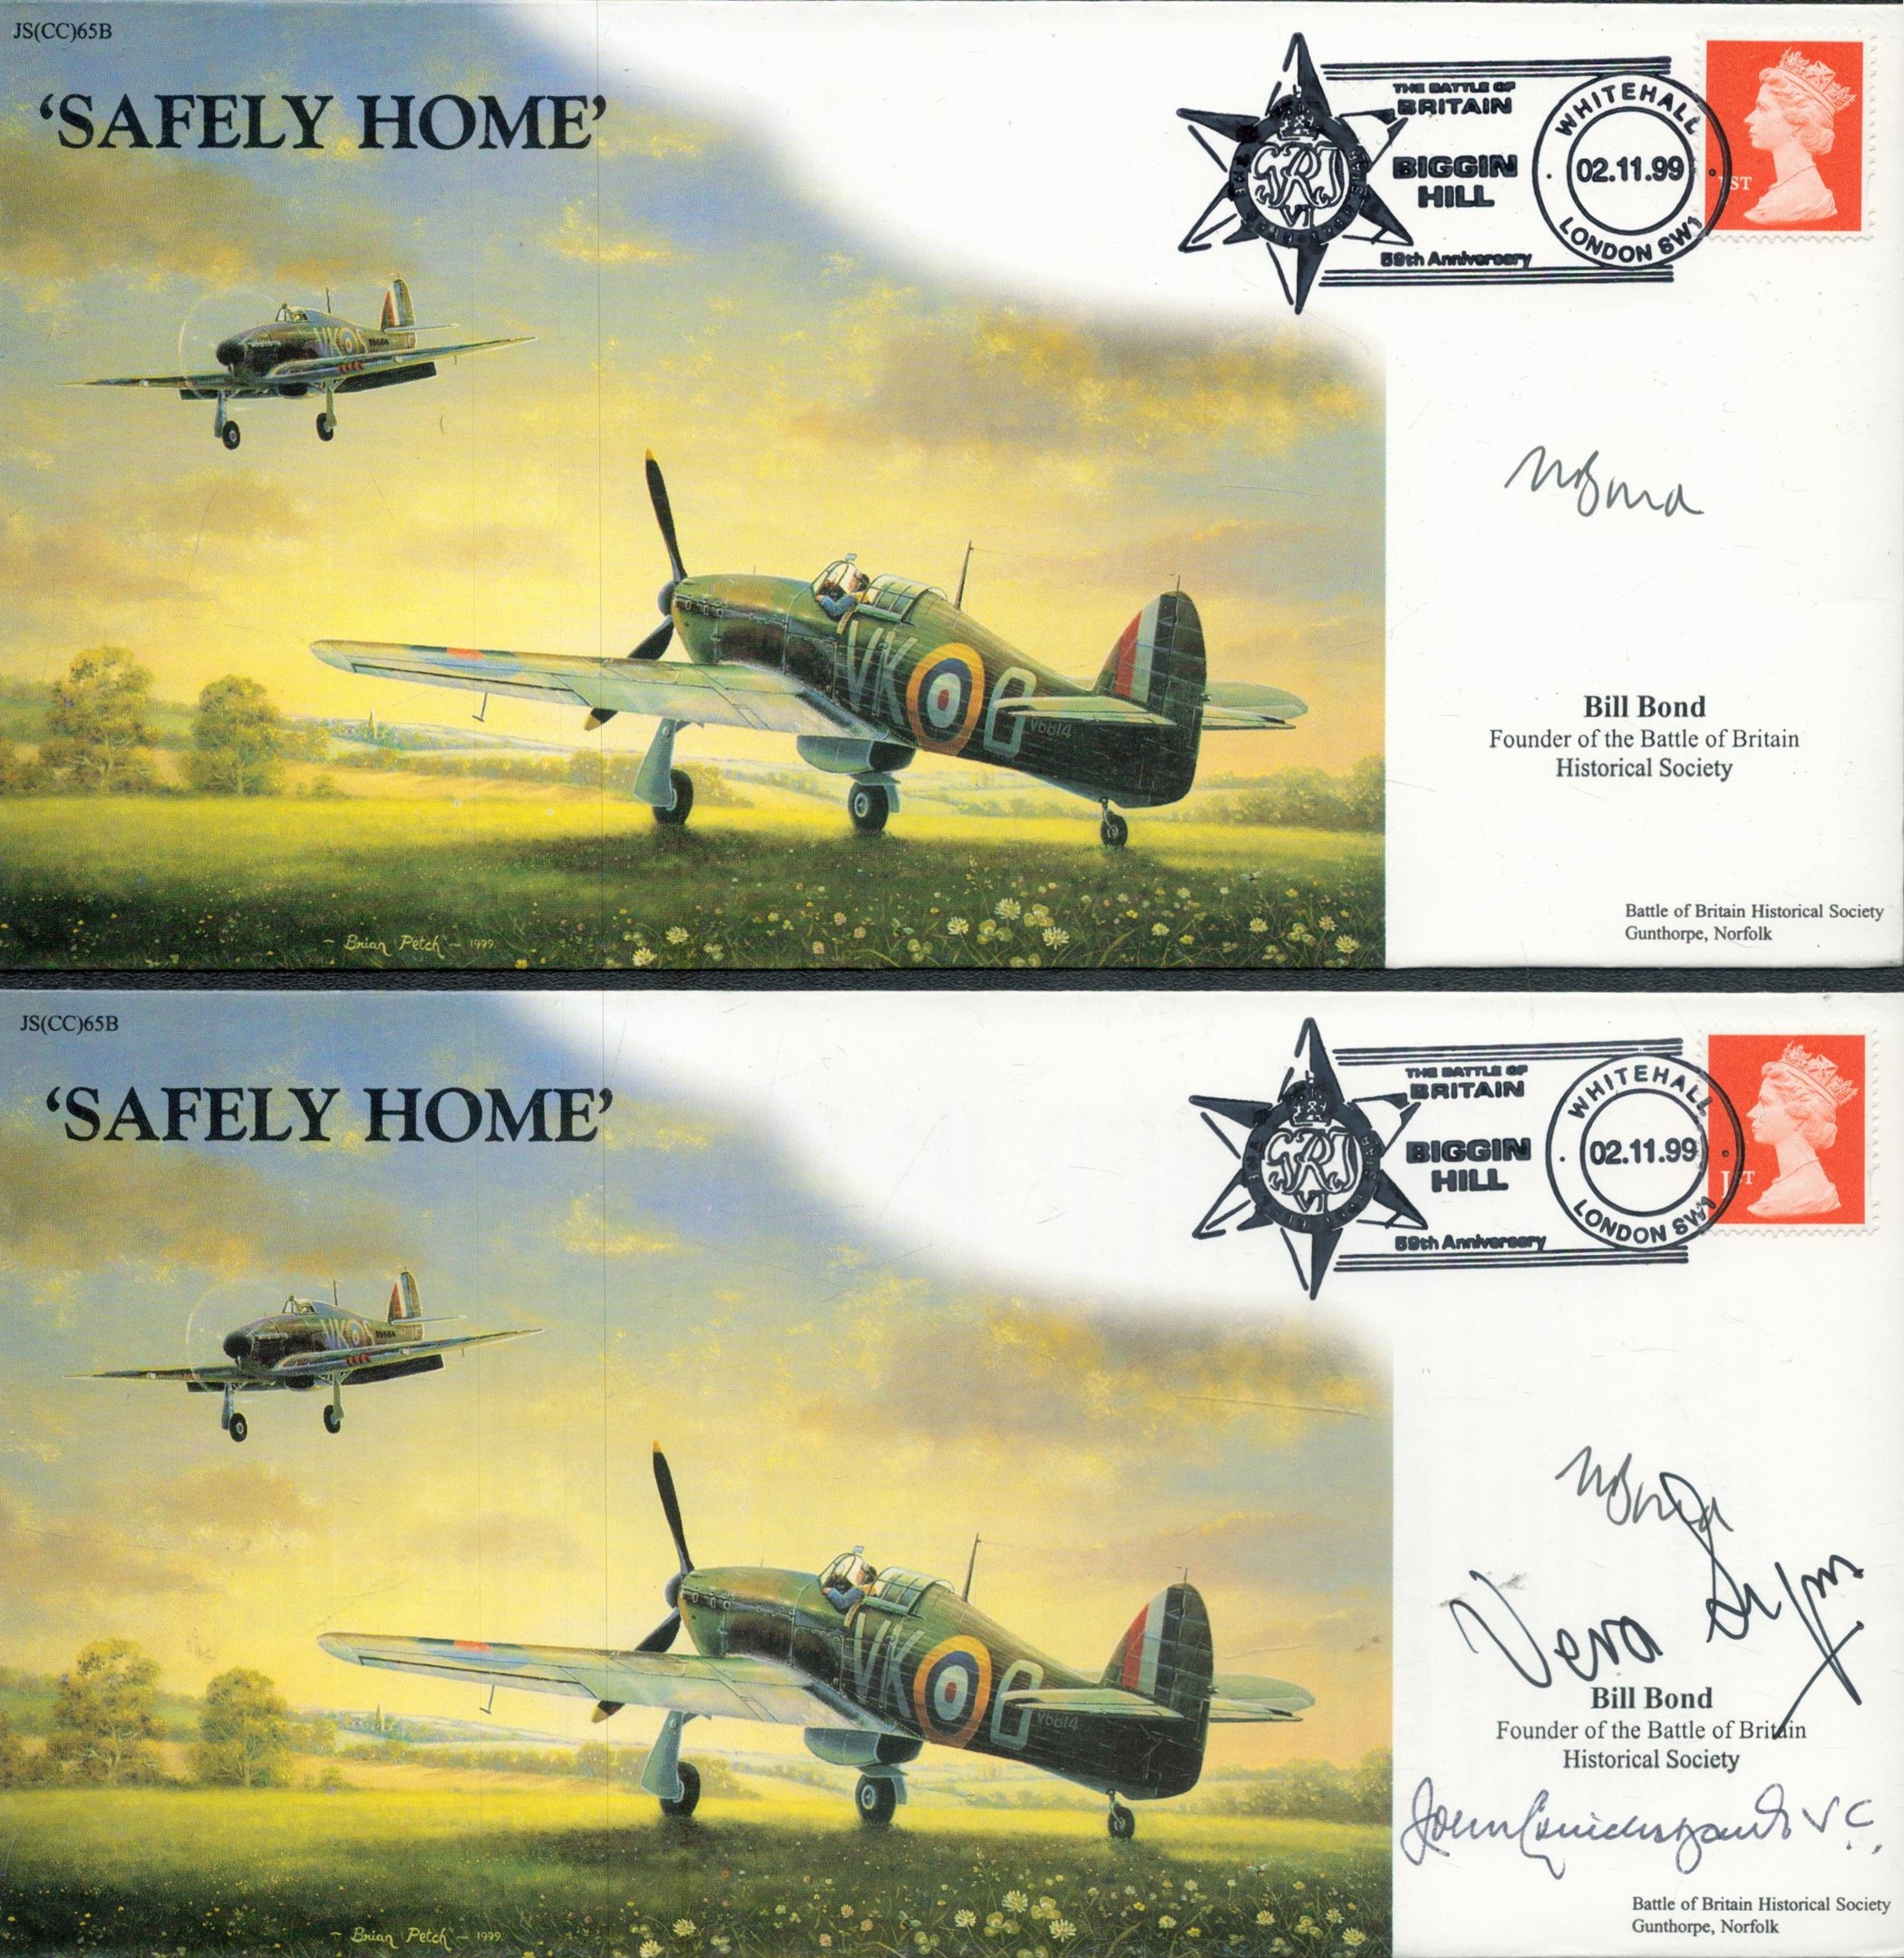 Safely Home Collection of 4 Signed FDCs signatures include Robert F T Doe, Hans-Ekkehard Bob, - Image 5 of 6